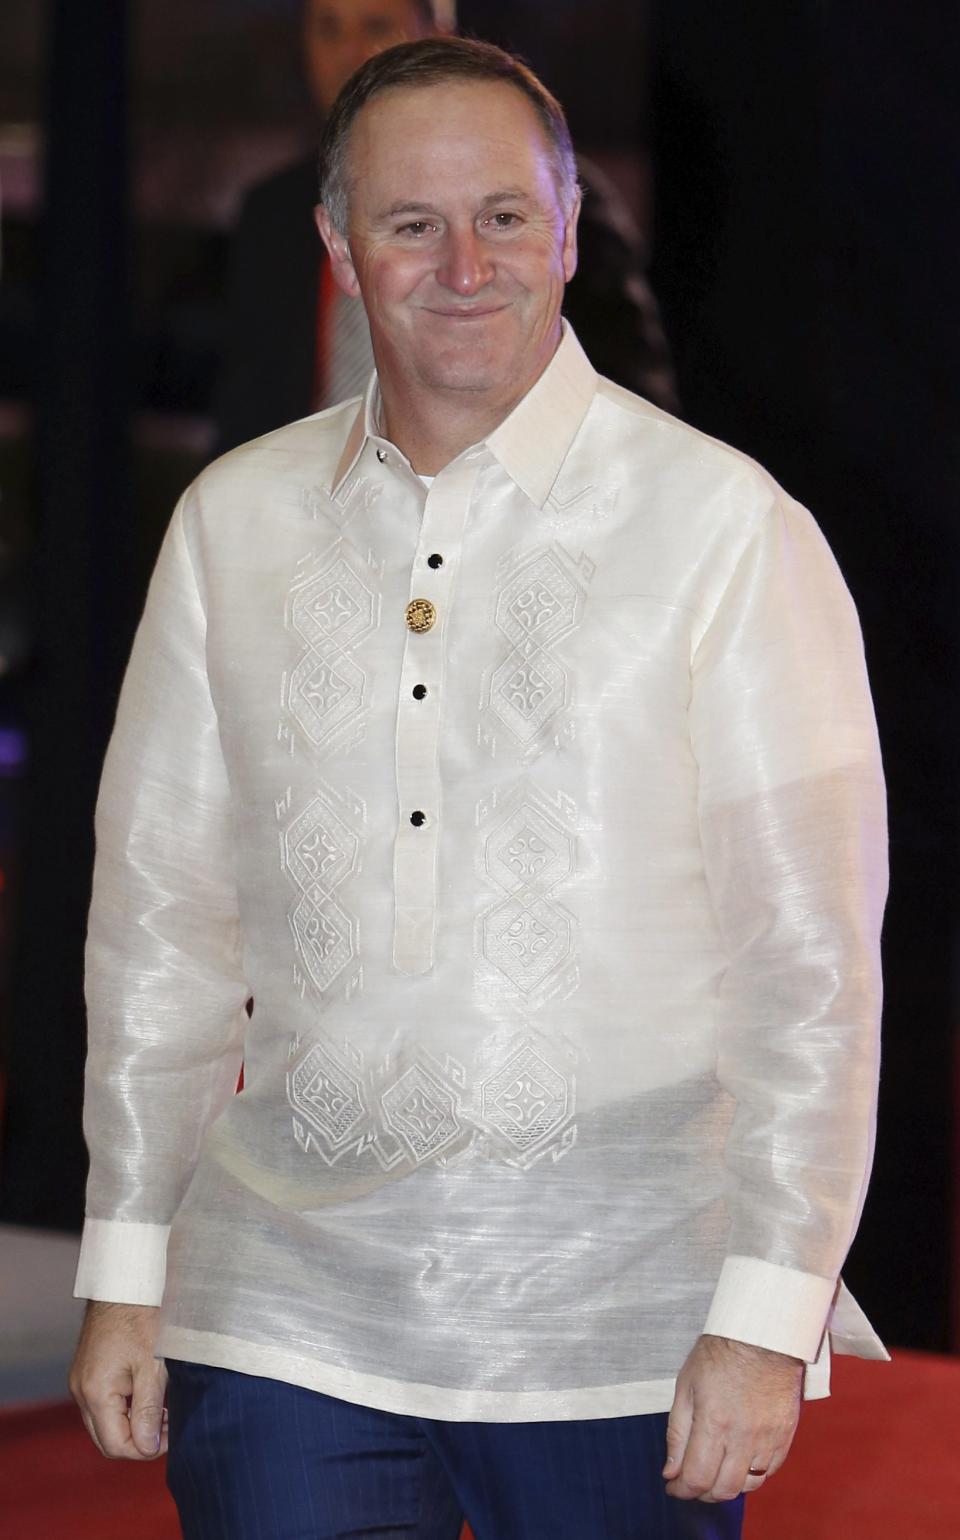 New Zealand's Prime Minister John Key arrives in a traditional barong for a welcome dinner during the Asia-Pacific Economic Cooperation (APEC) summit in Manila